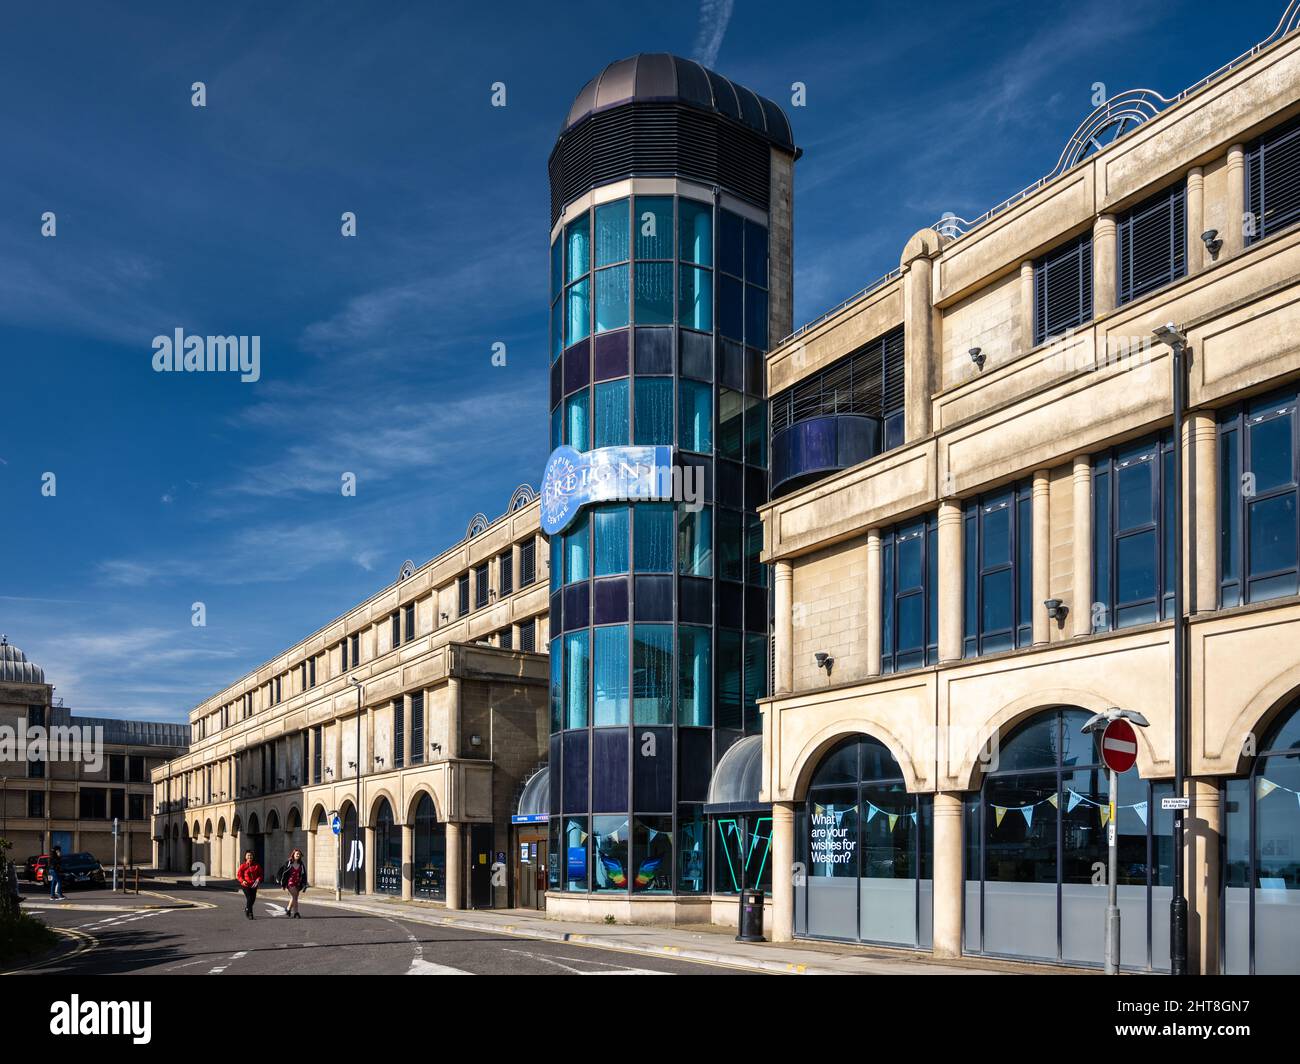 Sun shines on the 1990s Sovereign Shopping Centre in Weston-Super-Mare ahead of its refurbishment and repurposing following the decline of retail. Stock Photo